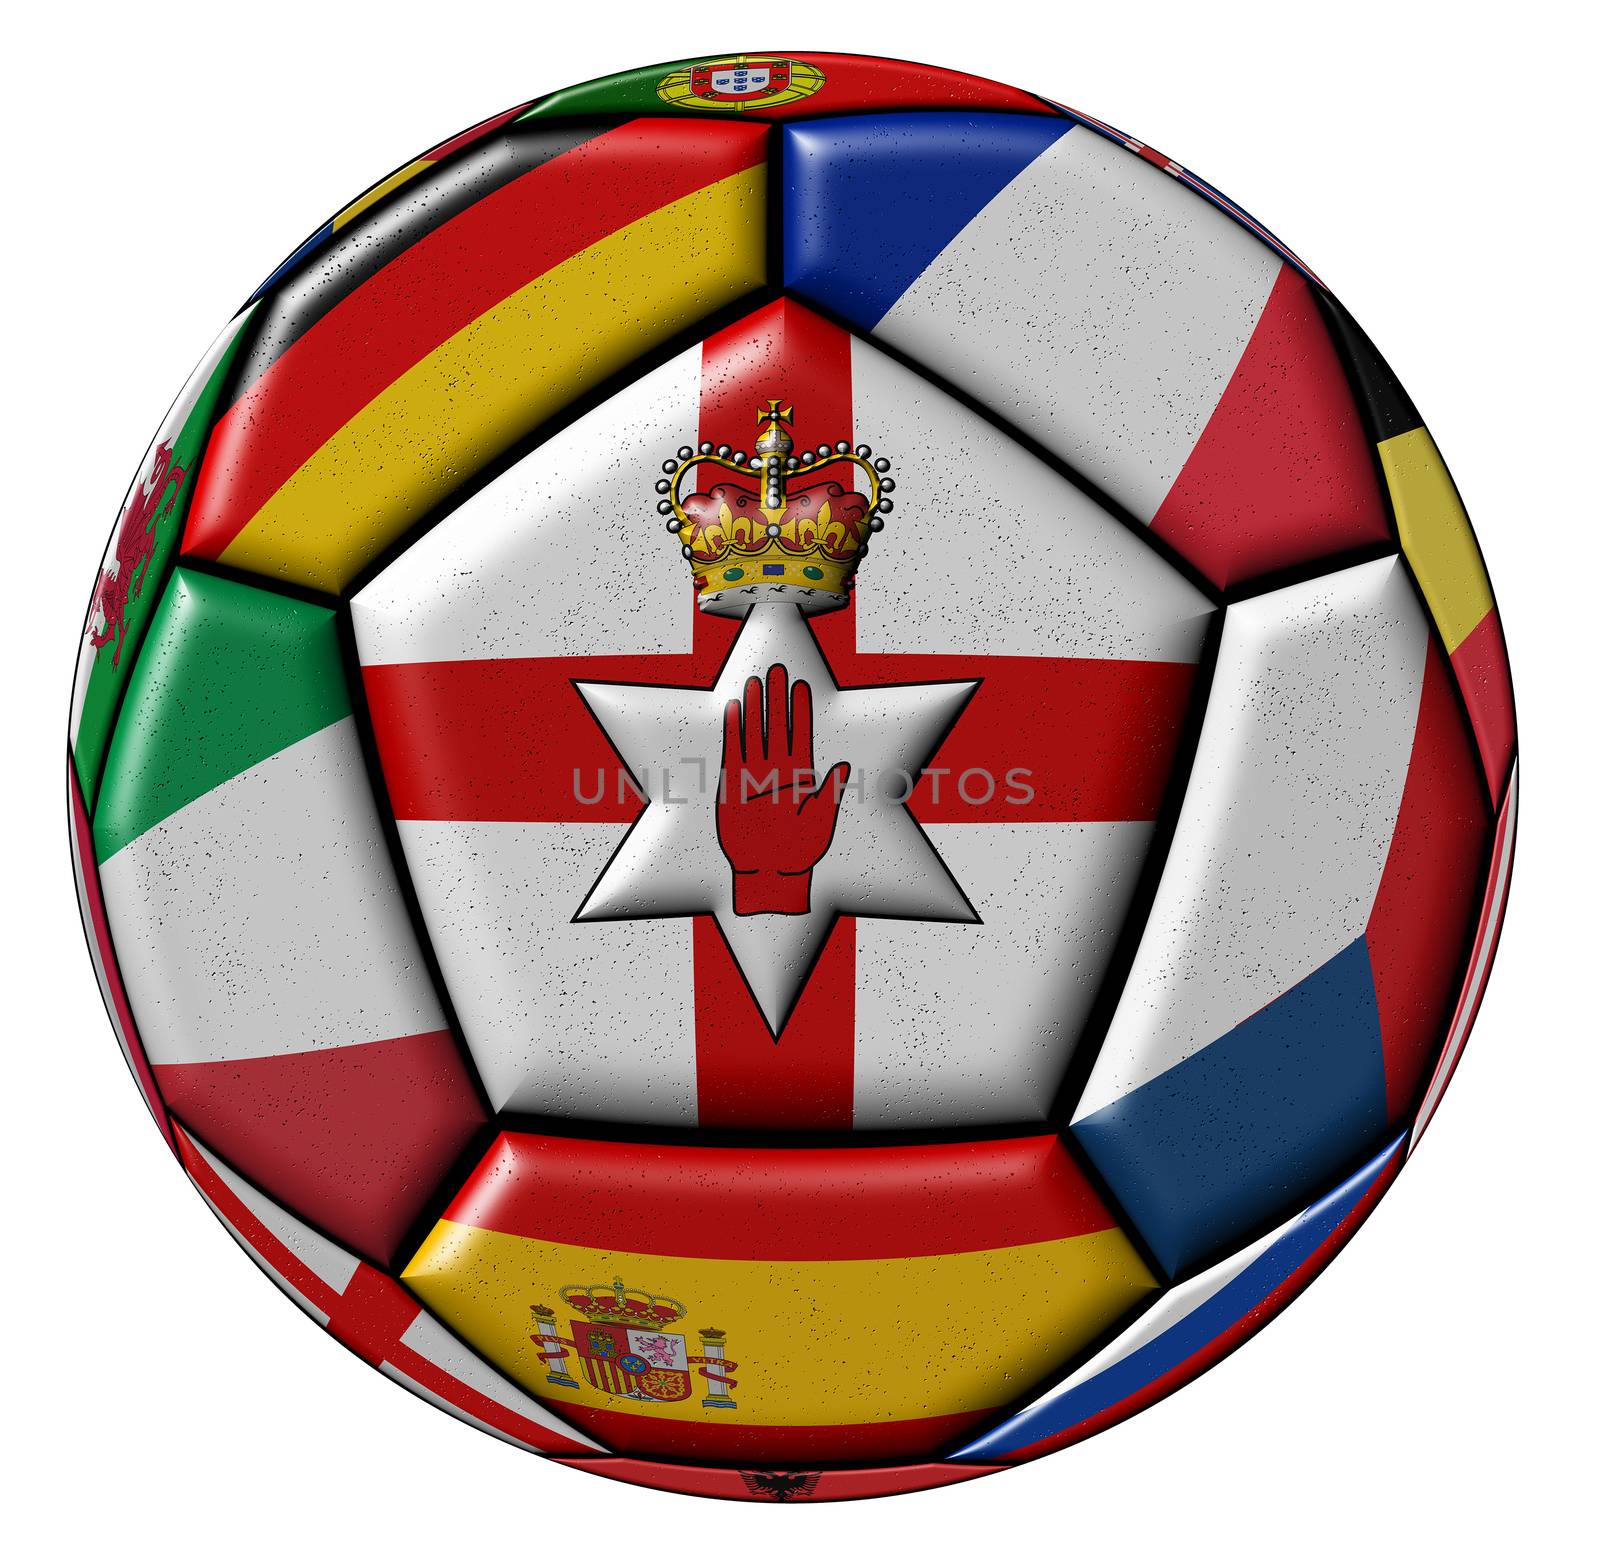 Soccer ball with flags - flag of Northern Ireland in the center by Mibuch